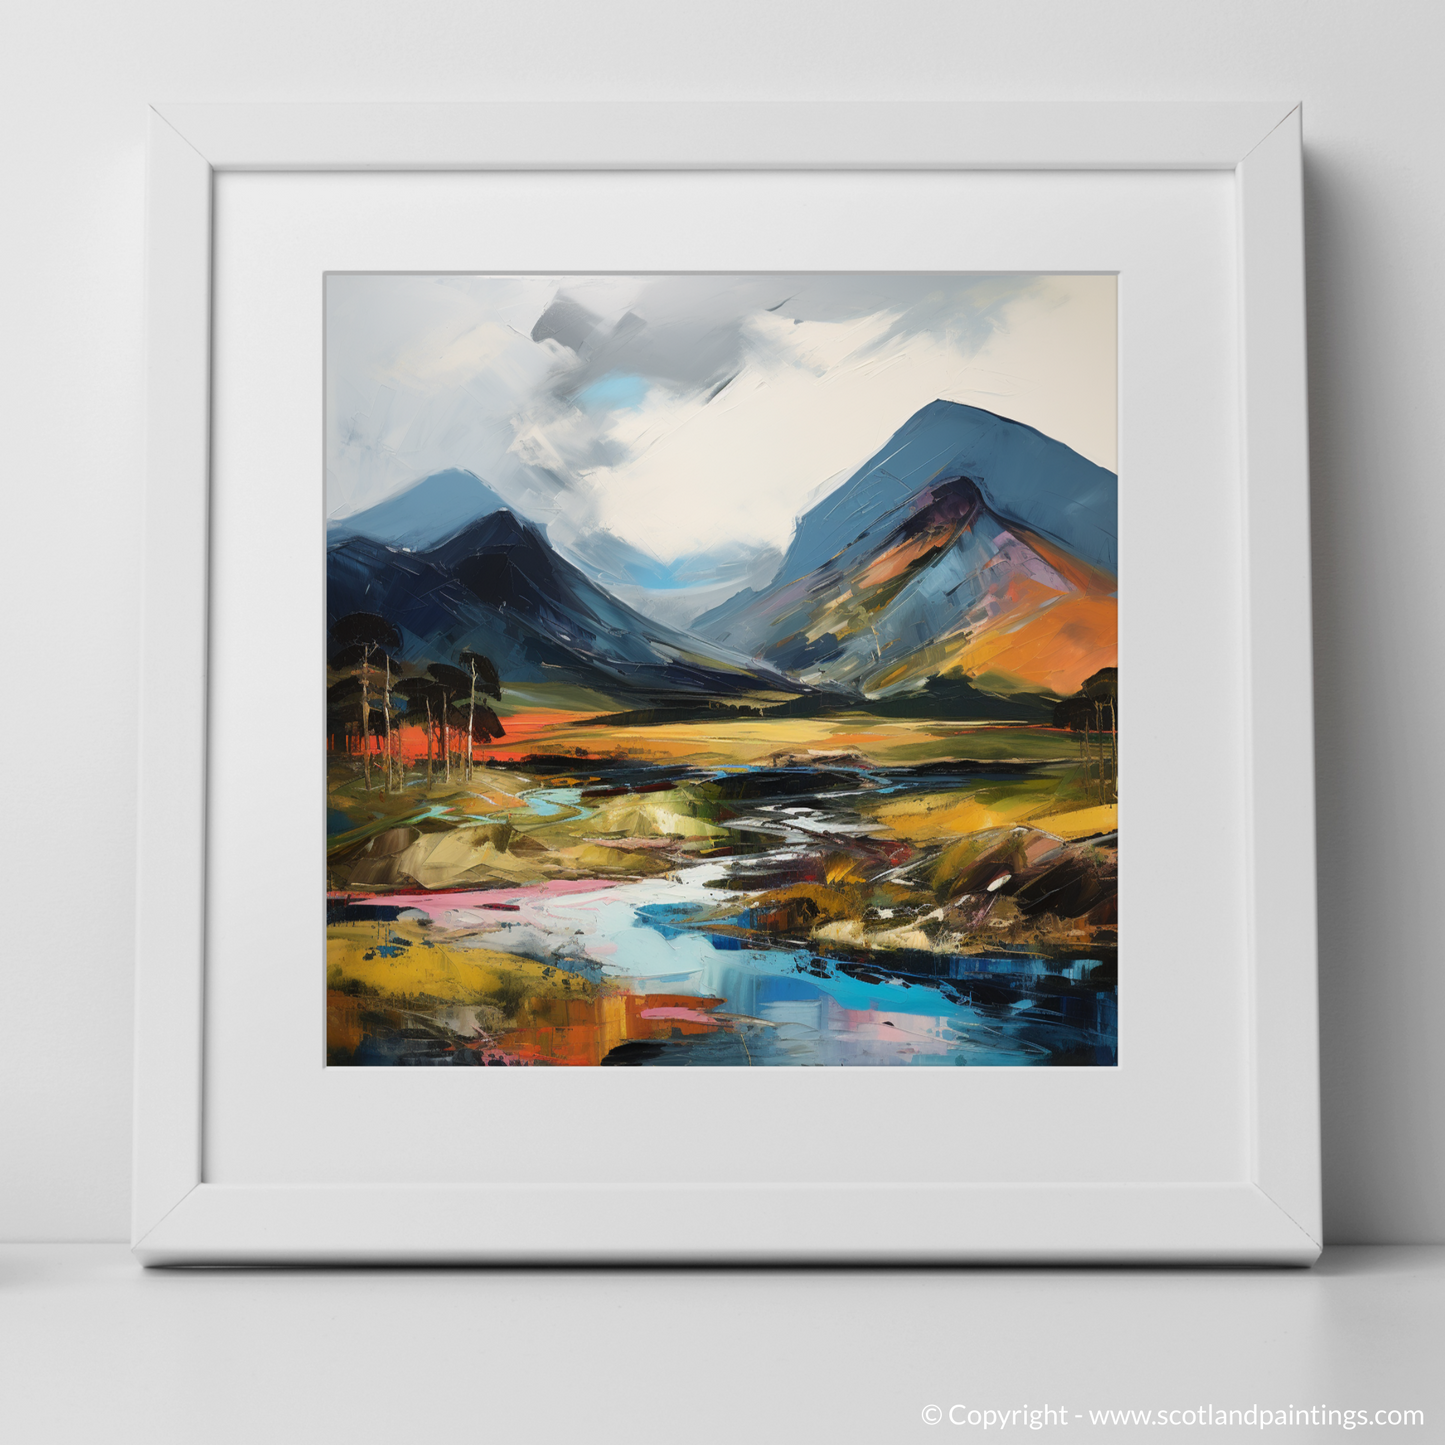 Painting and Art Print of Meall Corranaich. Expressionist Ode to Meall Corranaich.